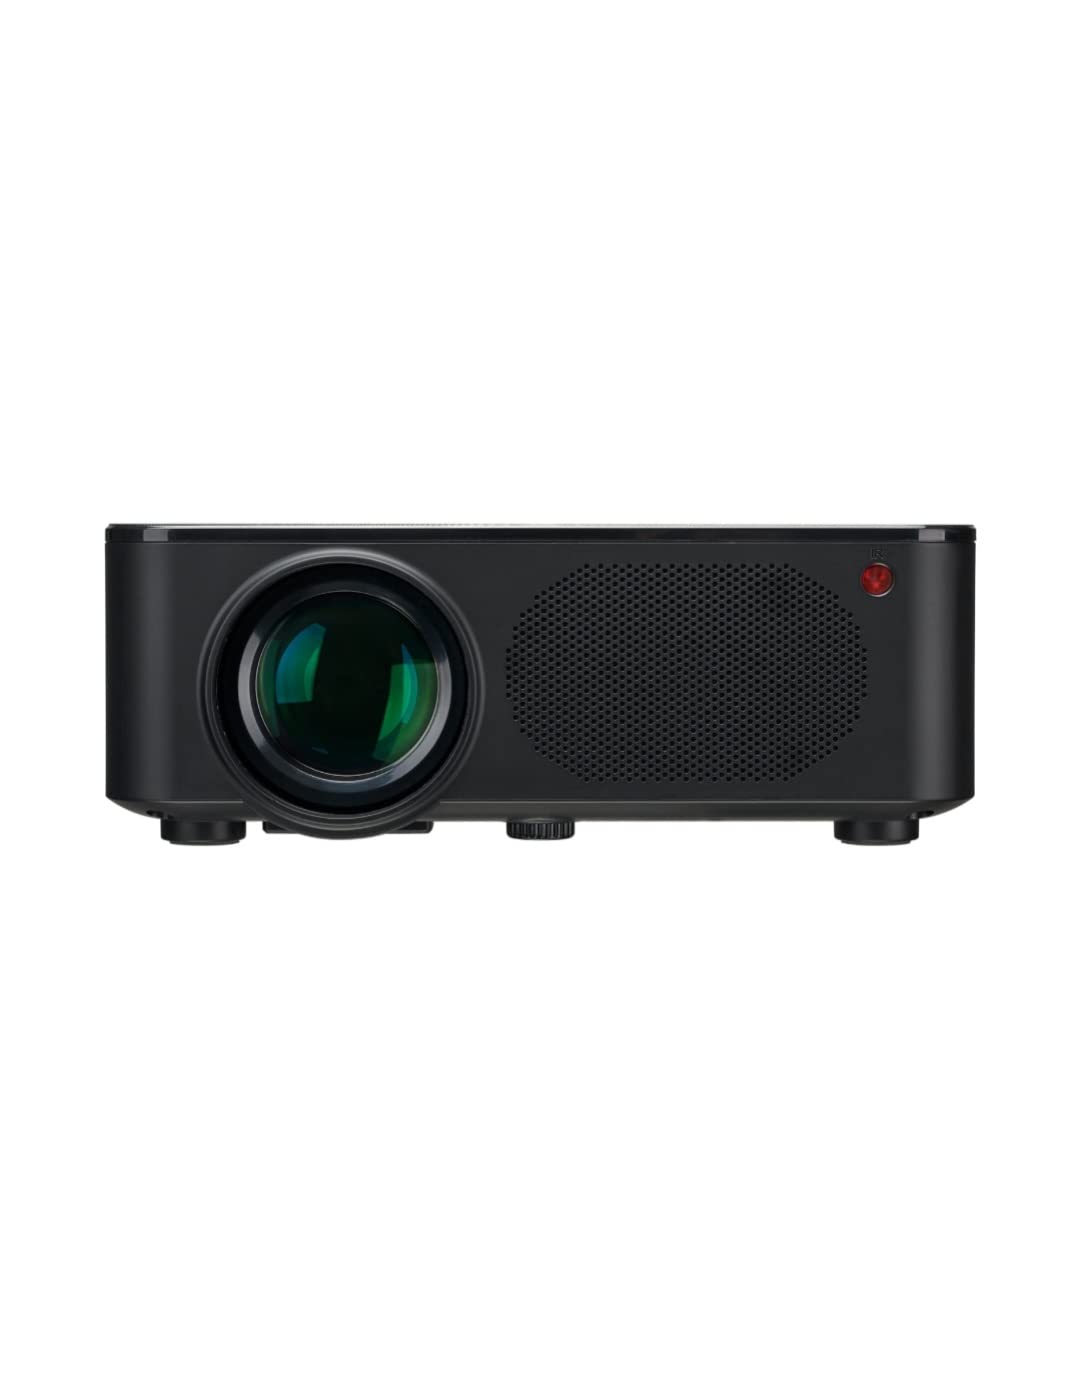 Onn 720p LCD Home Theater Projector Black 1280 x 720 Resolution Aspect ratio: 16:9, 4:3 Project up to 150 inches - 100020900